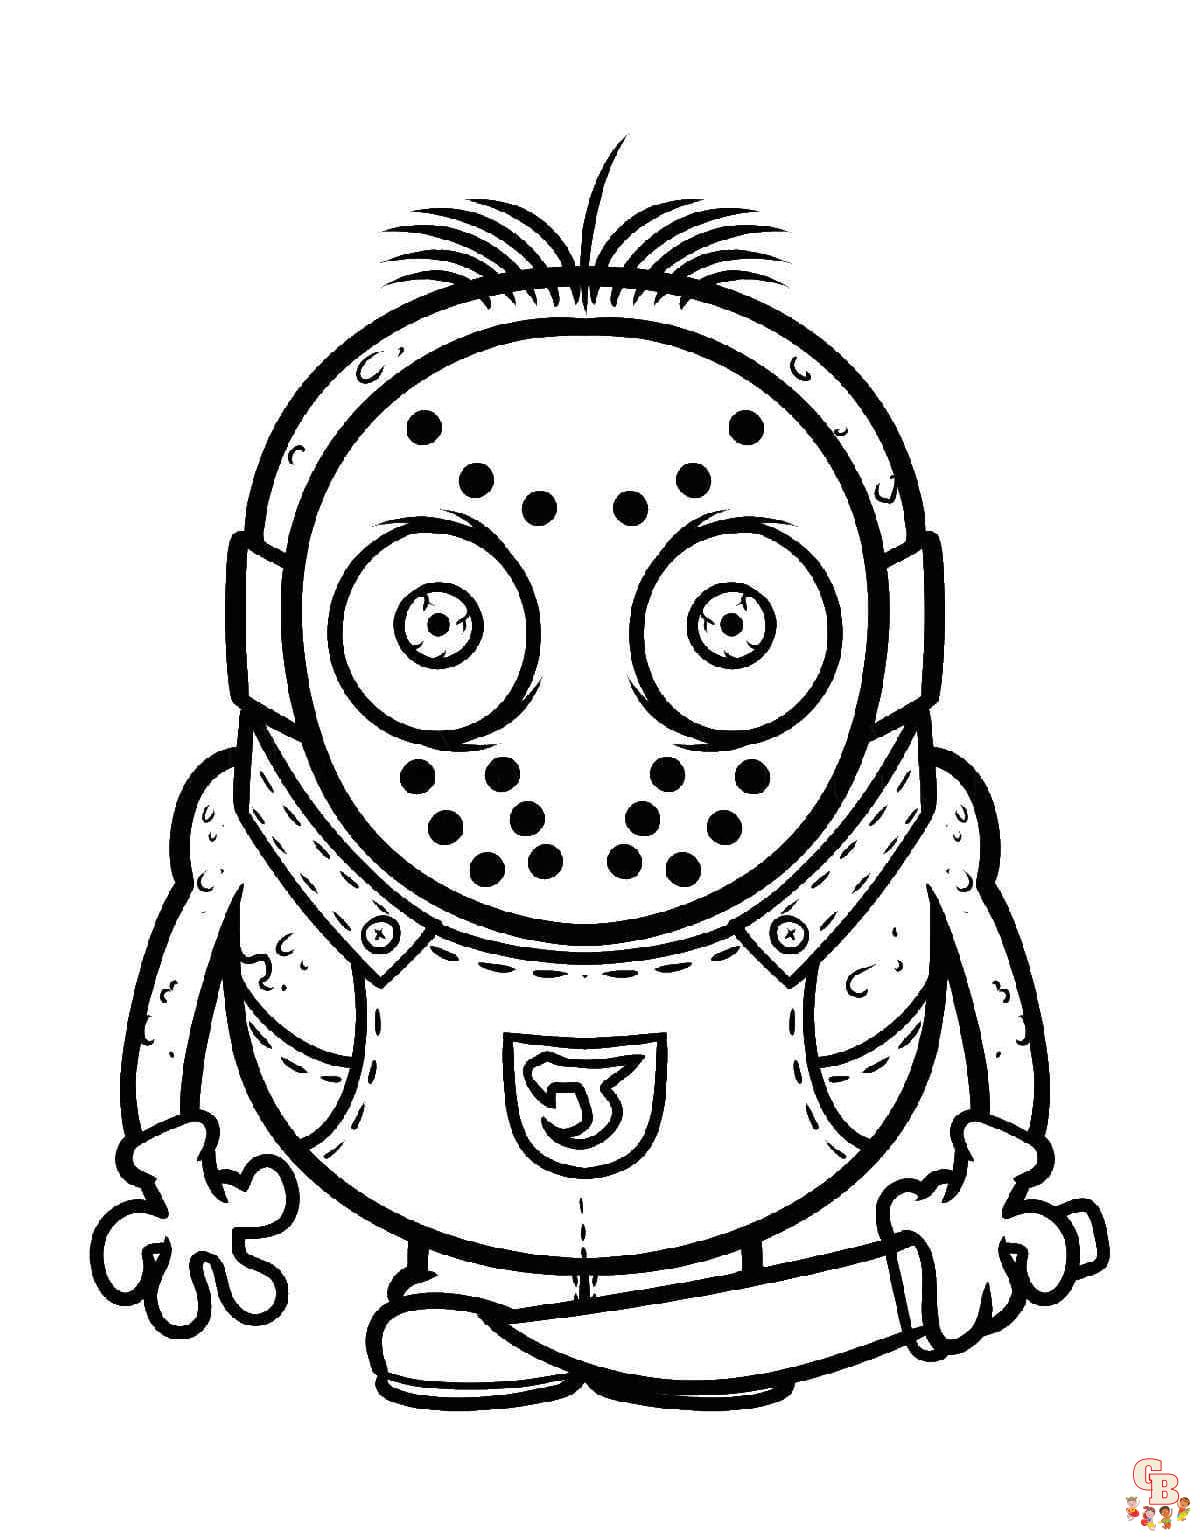 Printable Friday the 13th coloring sheets